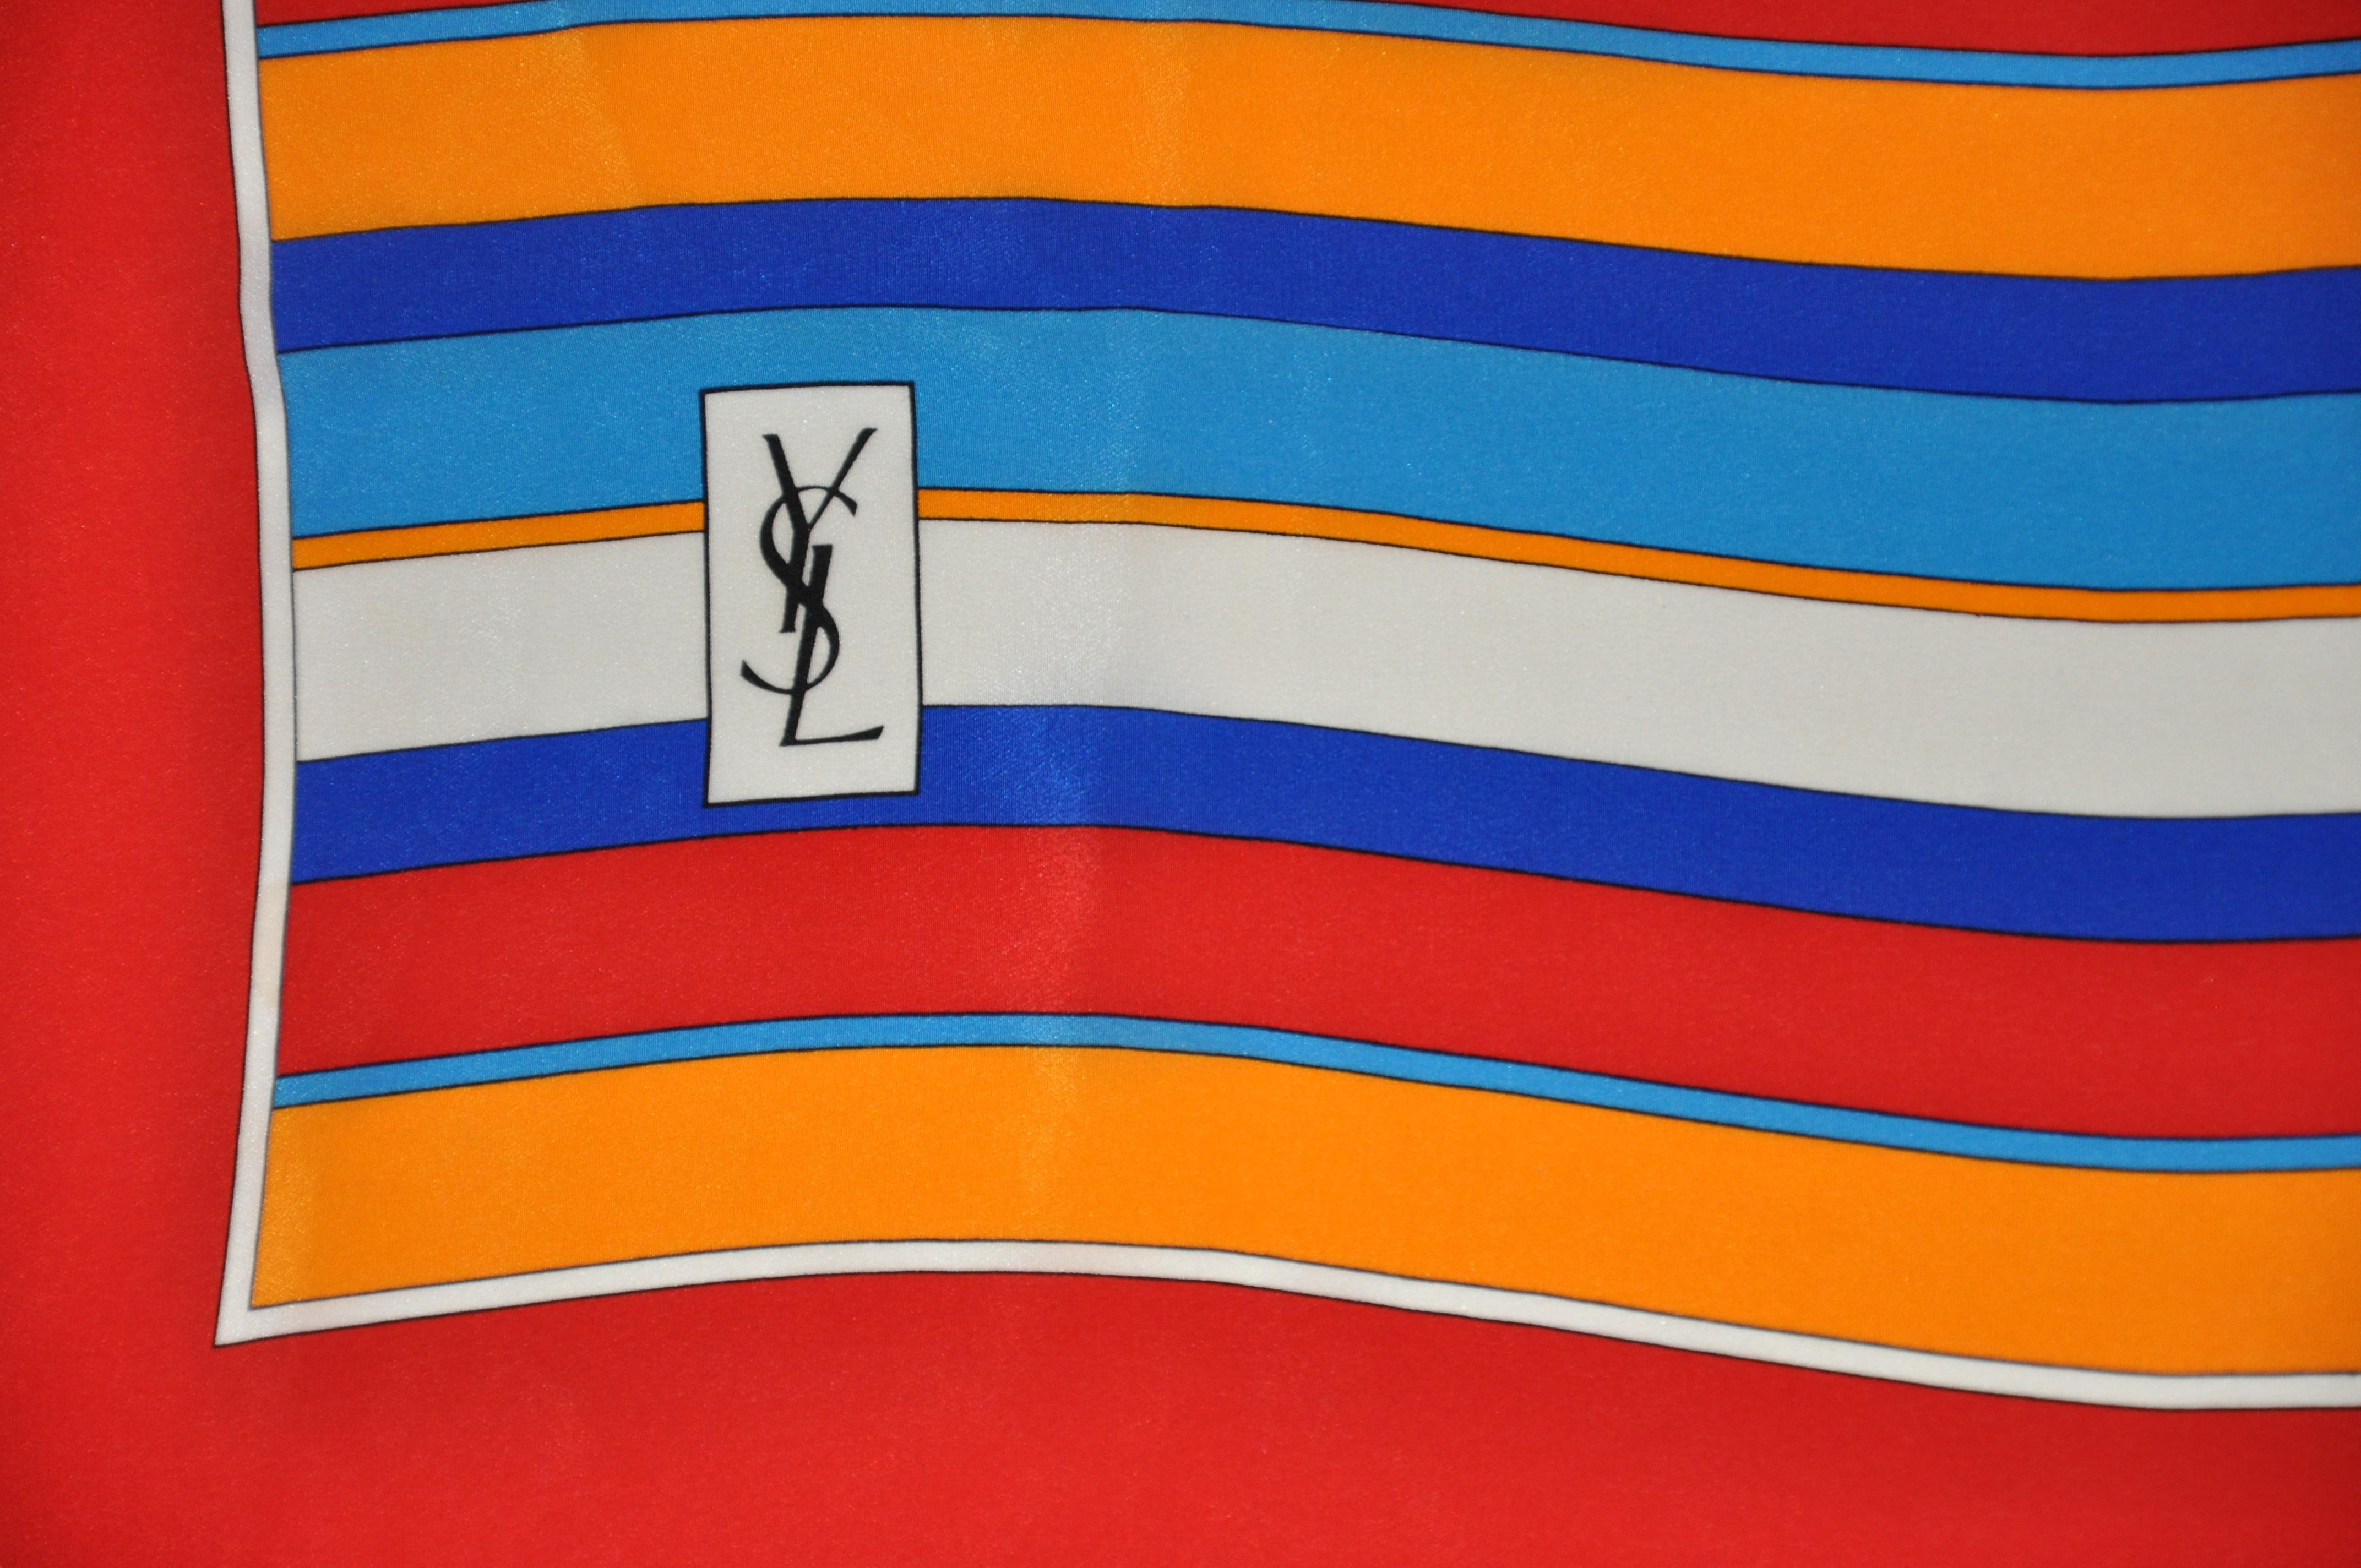        Yves Saint Laurent wonderfully vivid multi-color multi-sized striped silk scarf measures 34 inches by 34 1/2 inches, with hand-rolled edges. Made in France.